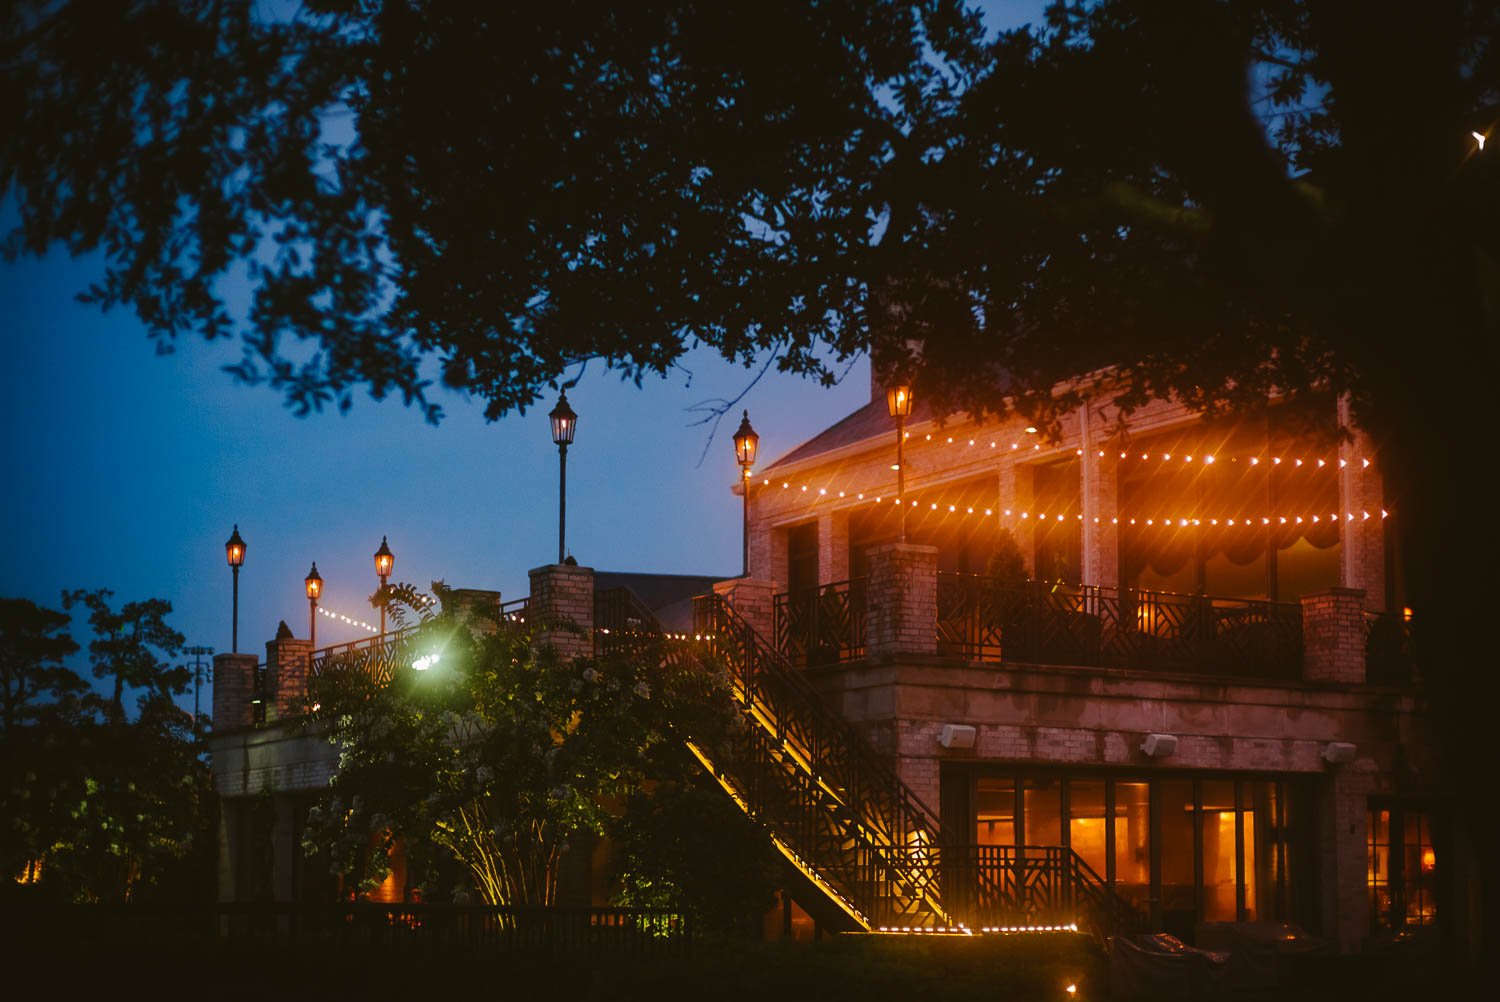 Photographed at dusk on a wet humid spring evening River Oaks Country Club-Leica photographer-Philip Thomas Photography